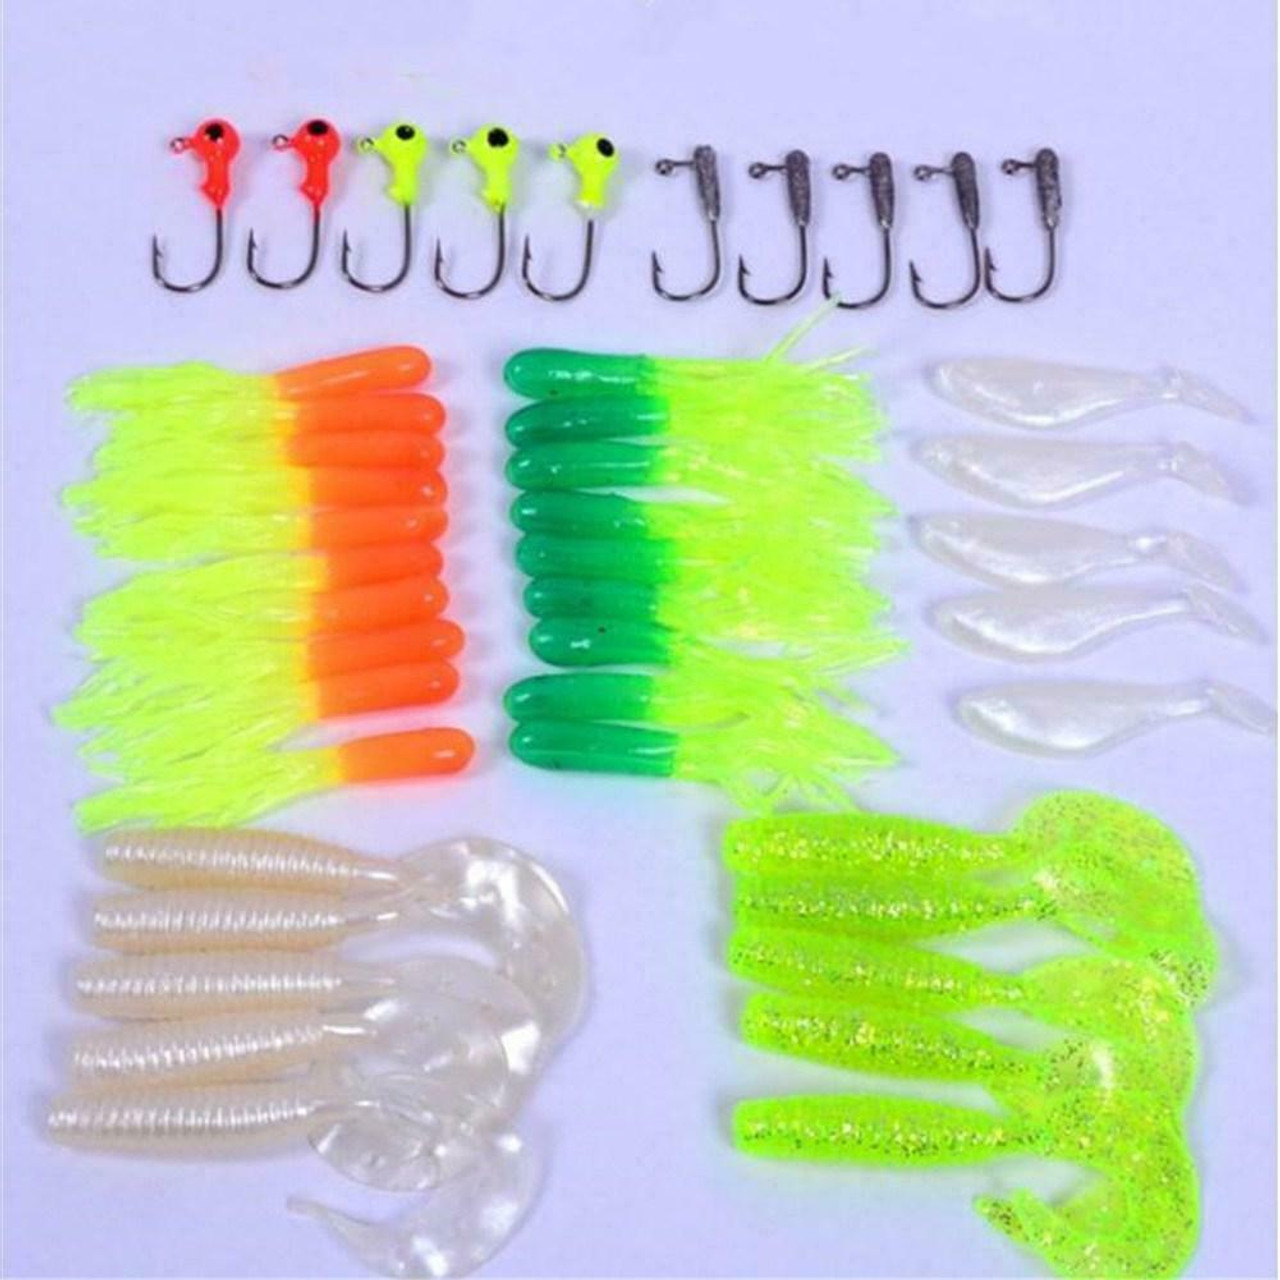 45 Piece Curly Tail Grub Worm Set - Fishing in Tackle